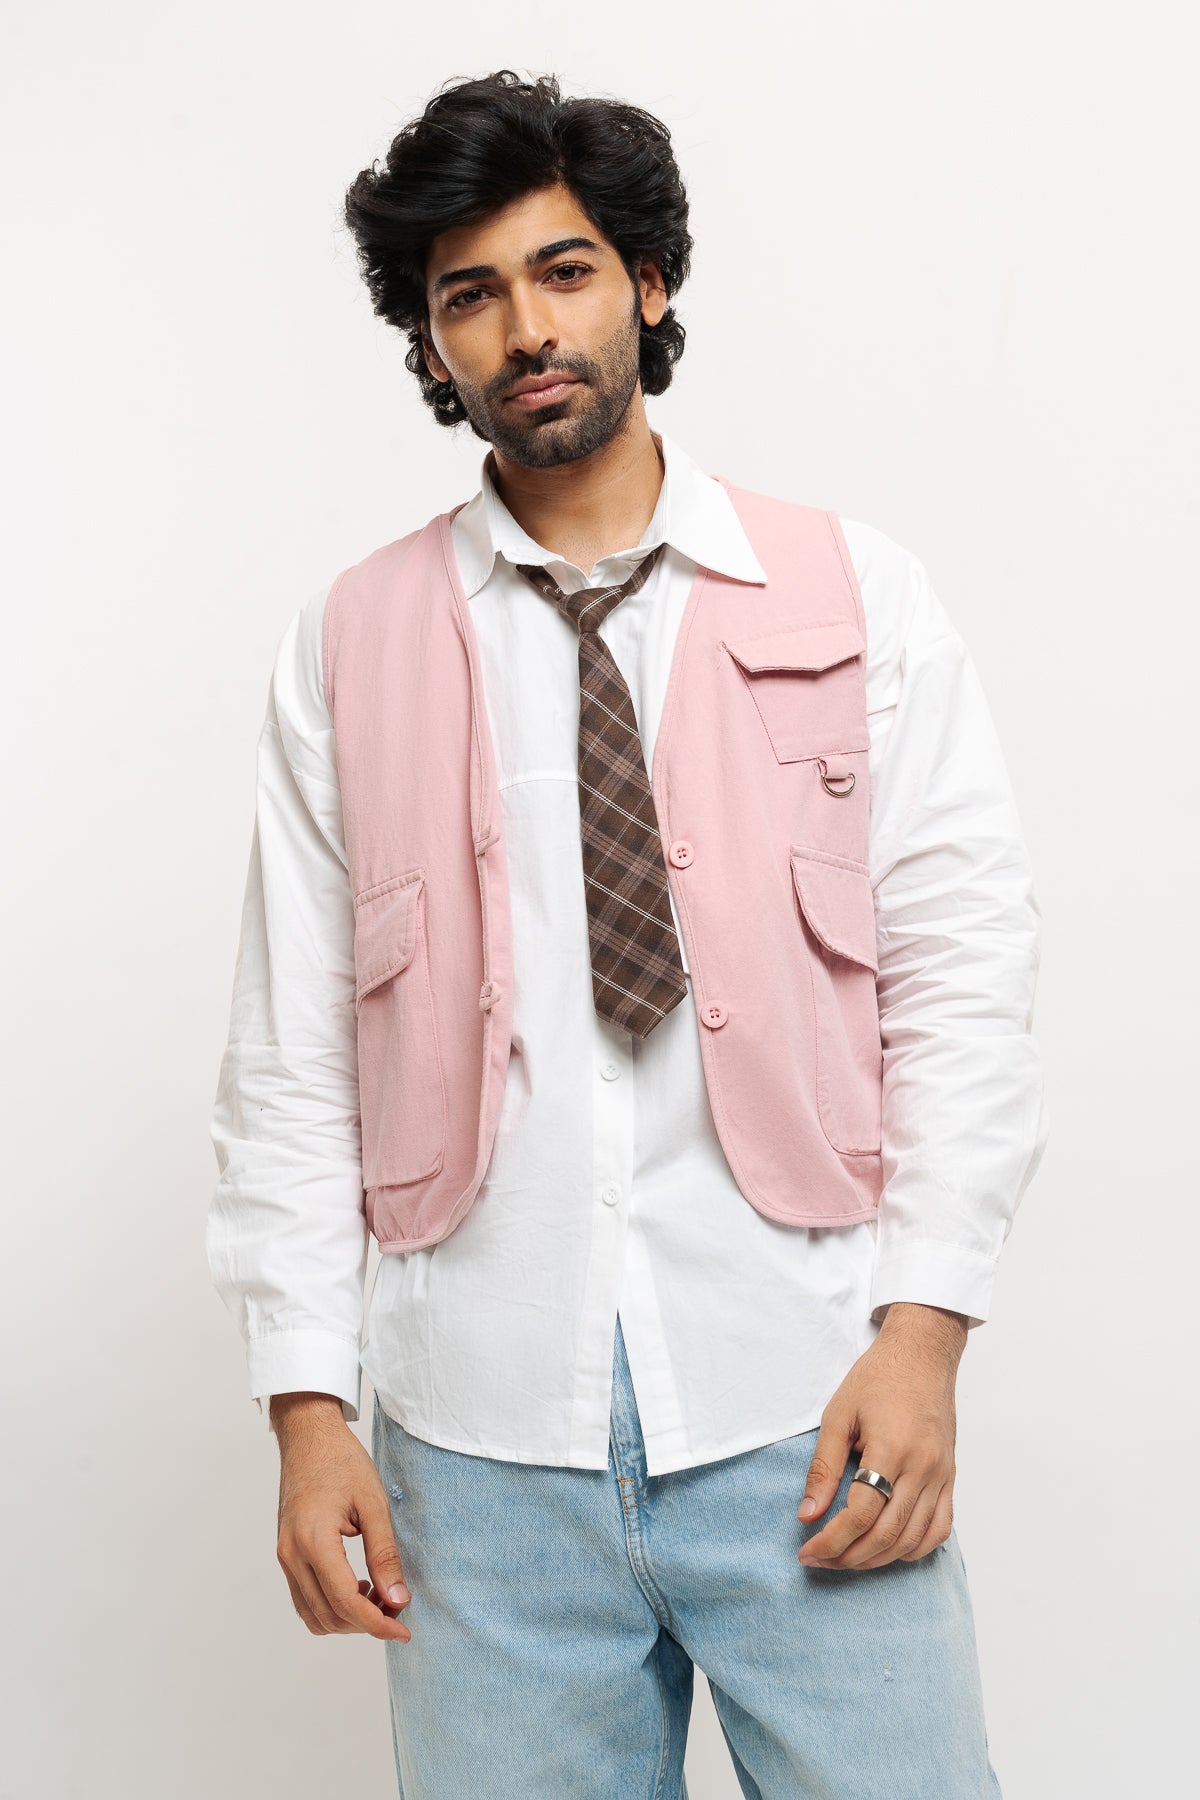 MEN'S PINK VESTED SHIRT WITH TIE